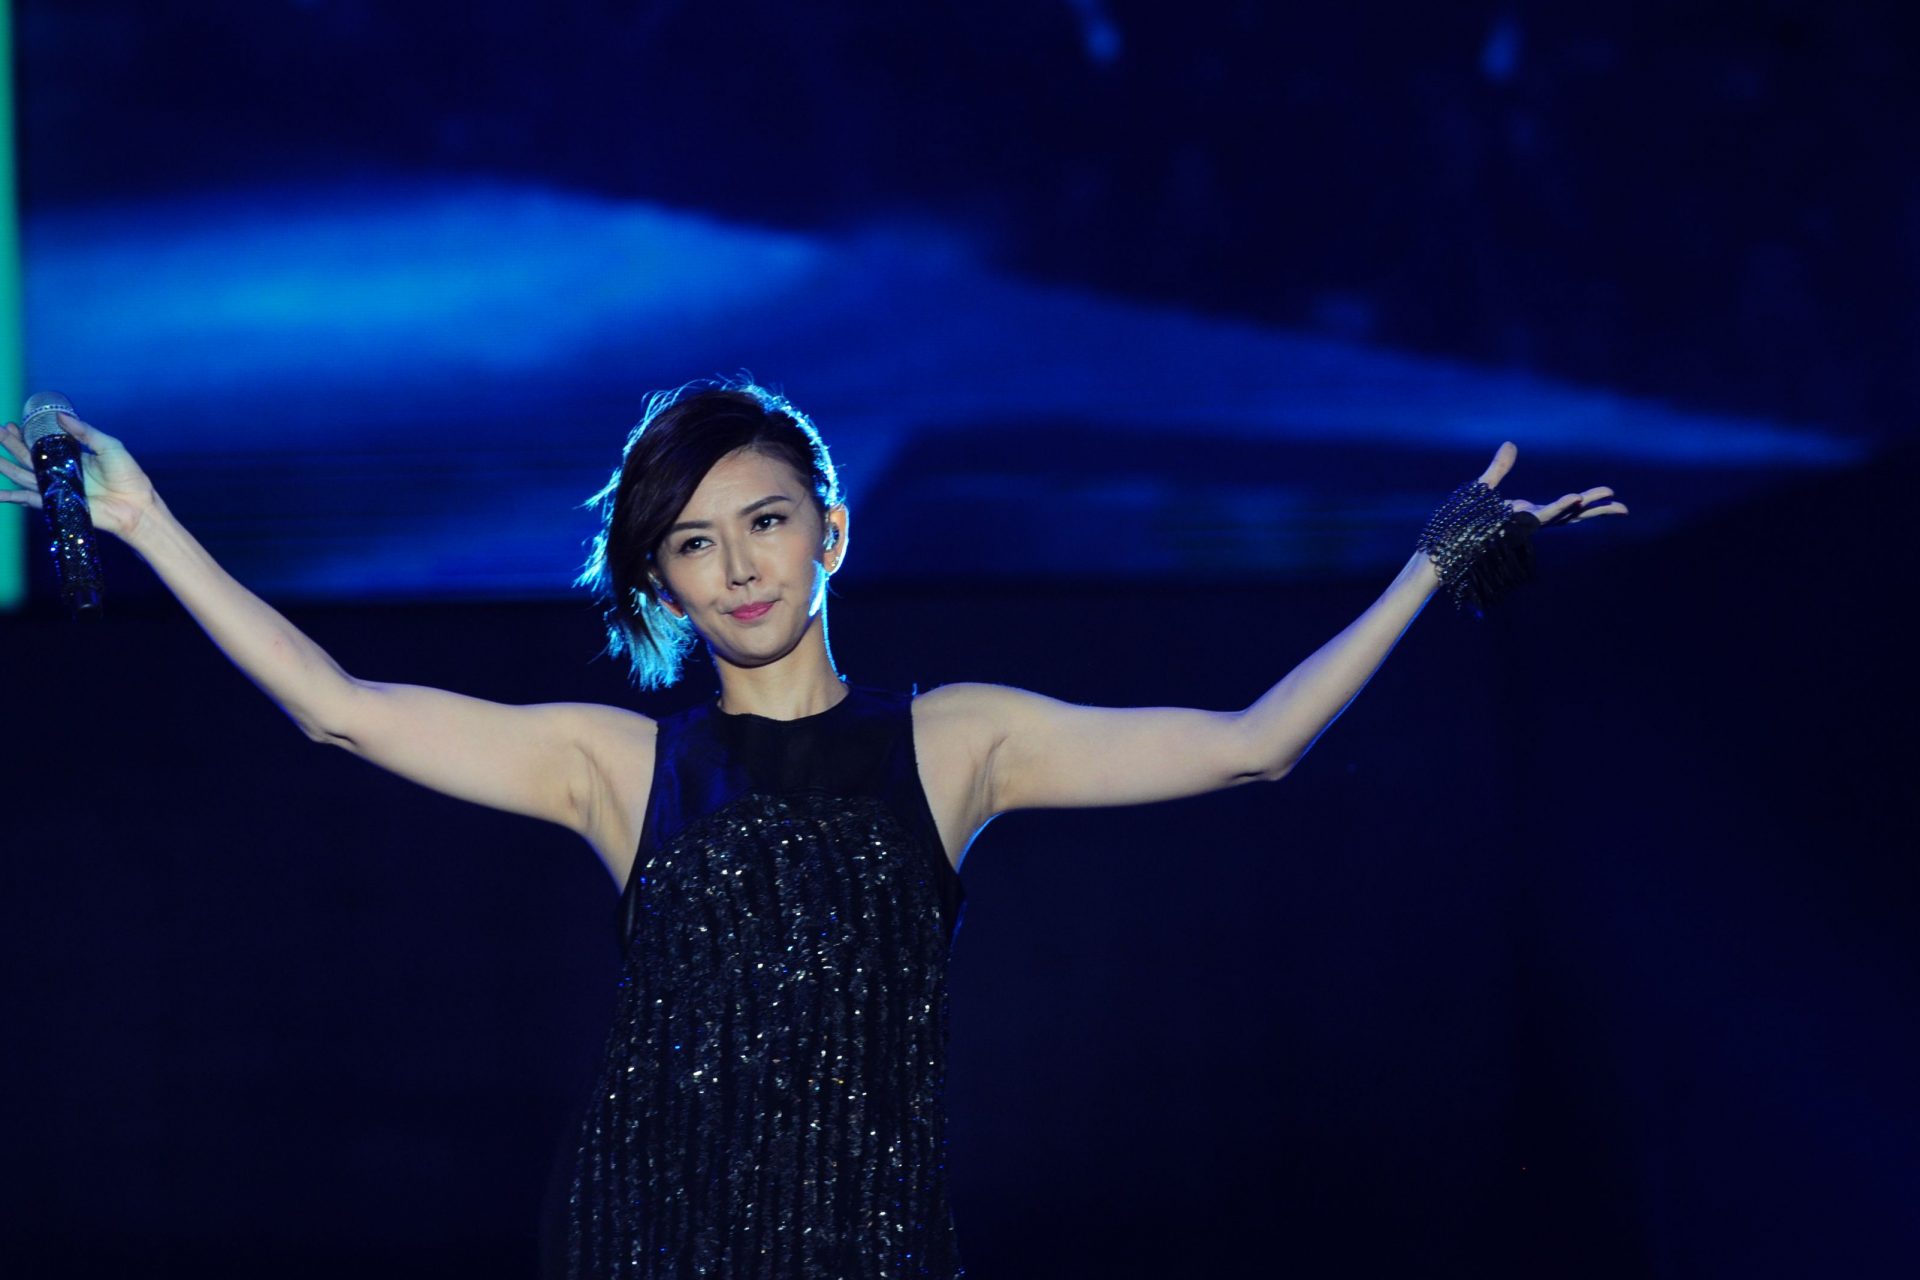 Sister of Stefanie Sun cuts ties with the Singaporean singer